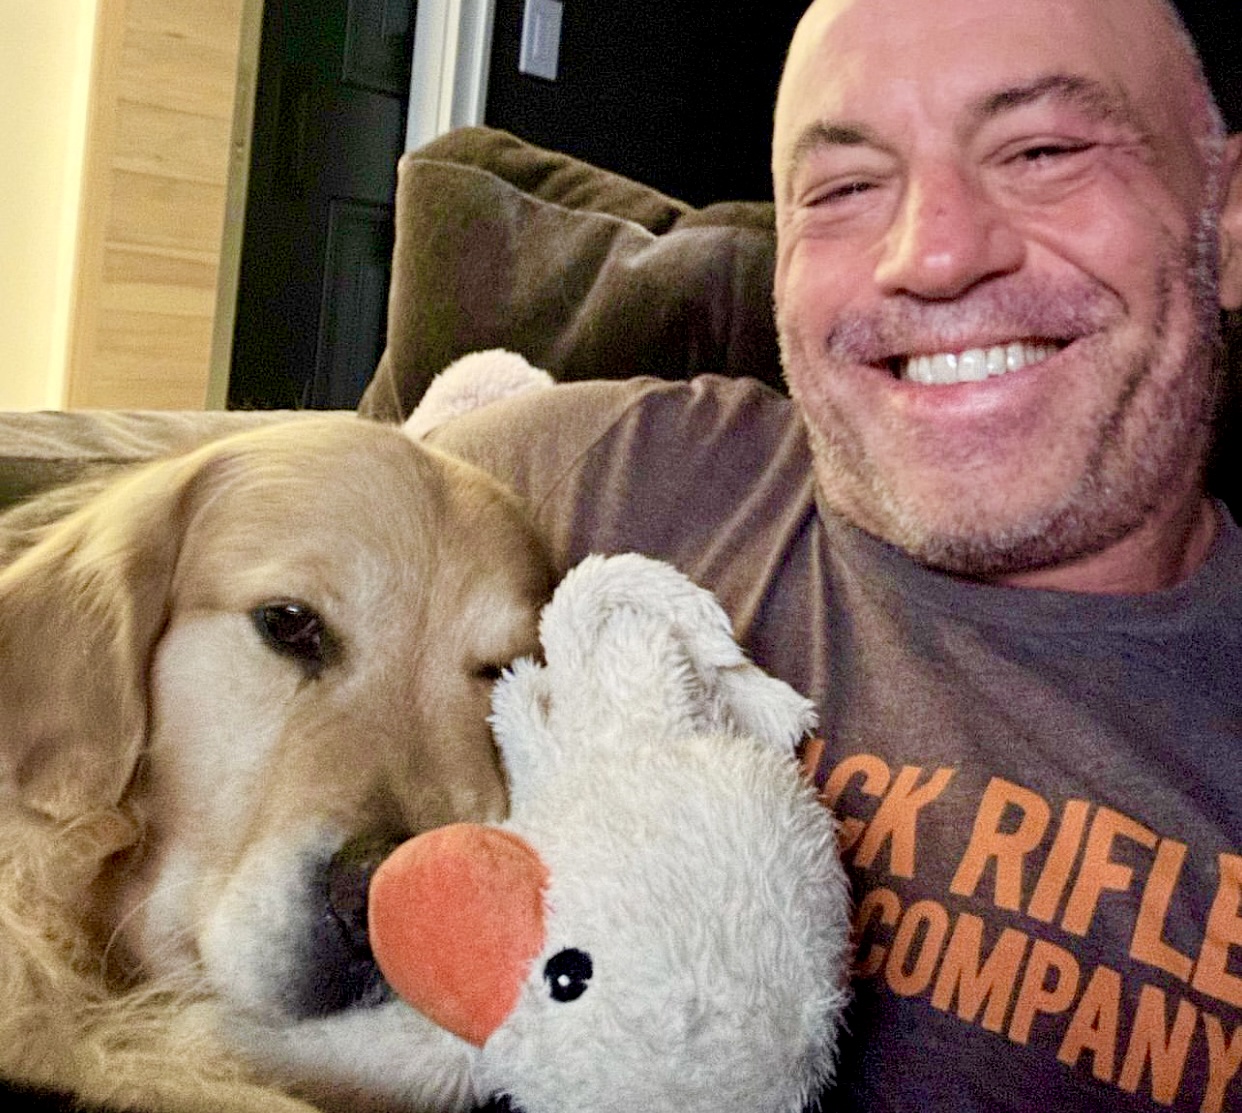 Keith Middlebrook, Keith Middlebrook Foundation, NBA, NFL, MLB, Taylor Swift, Save the Animals, Save dogs, Charity, Health, All Furry Souls Matter, Dog, Puppies, Joe Rogan